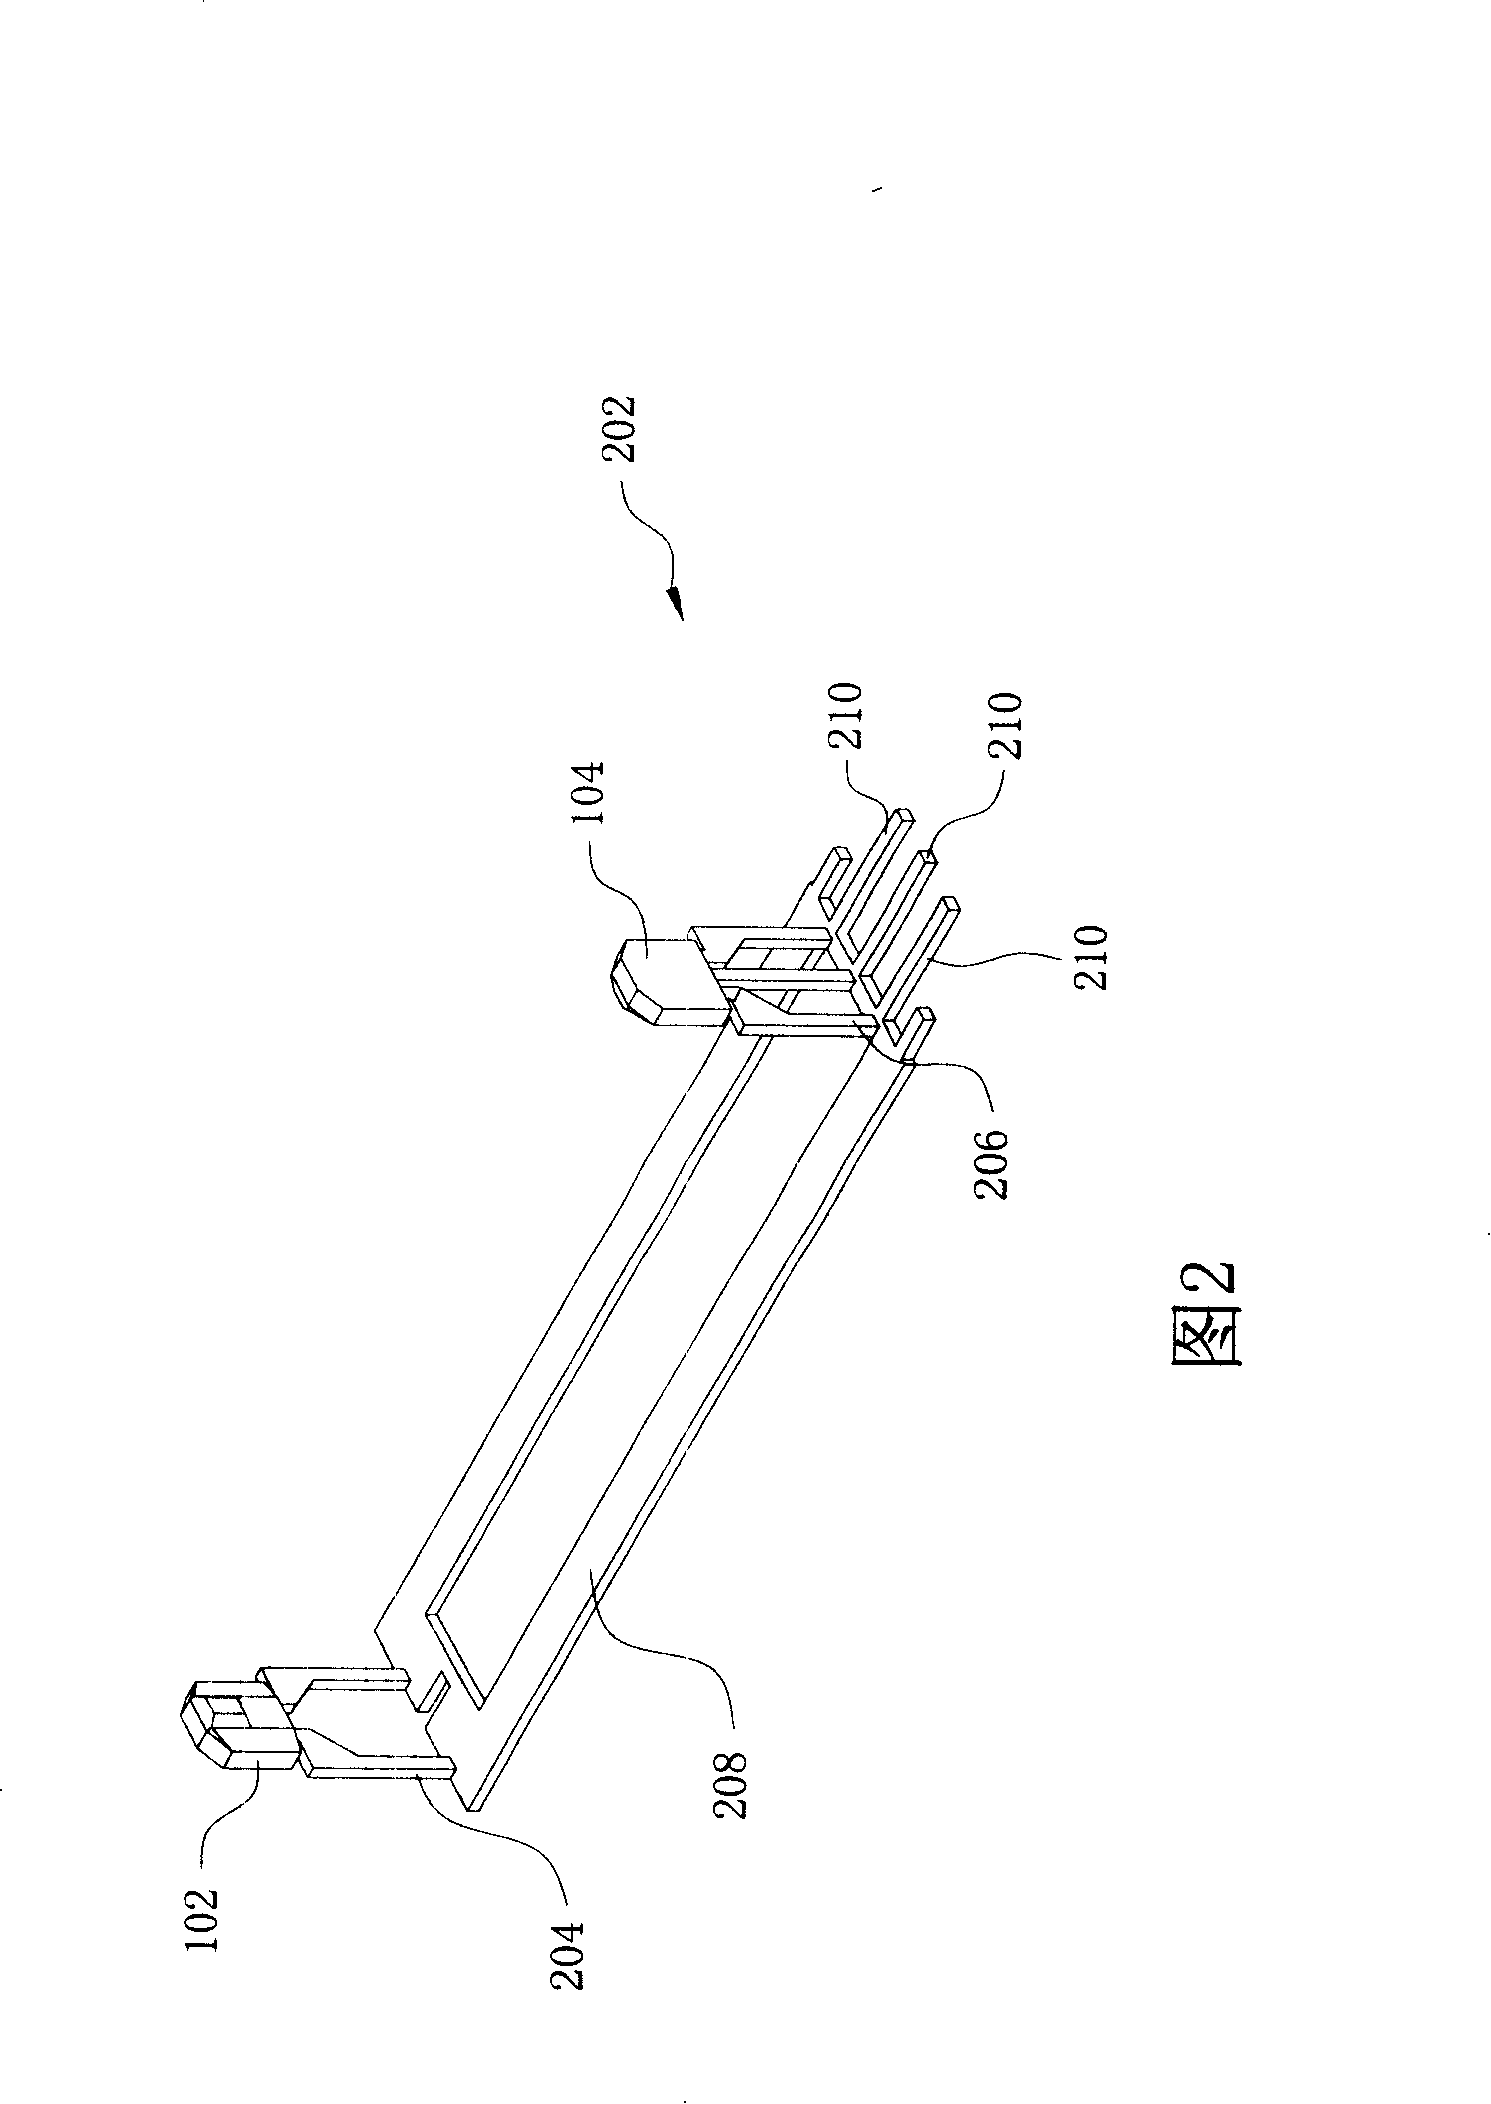 Opposed type light blocking equipment apparatus and method for making the same